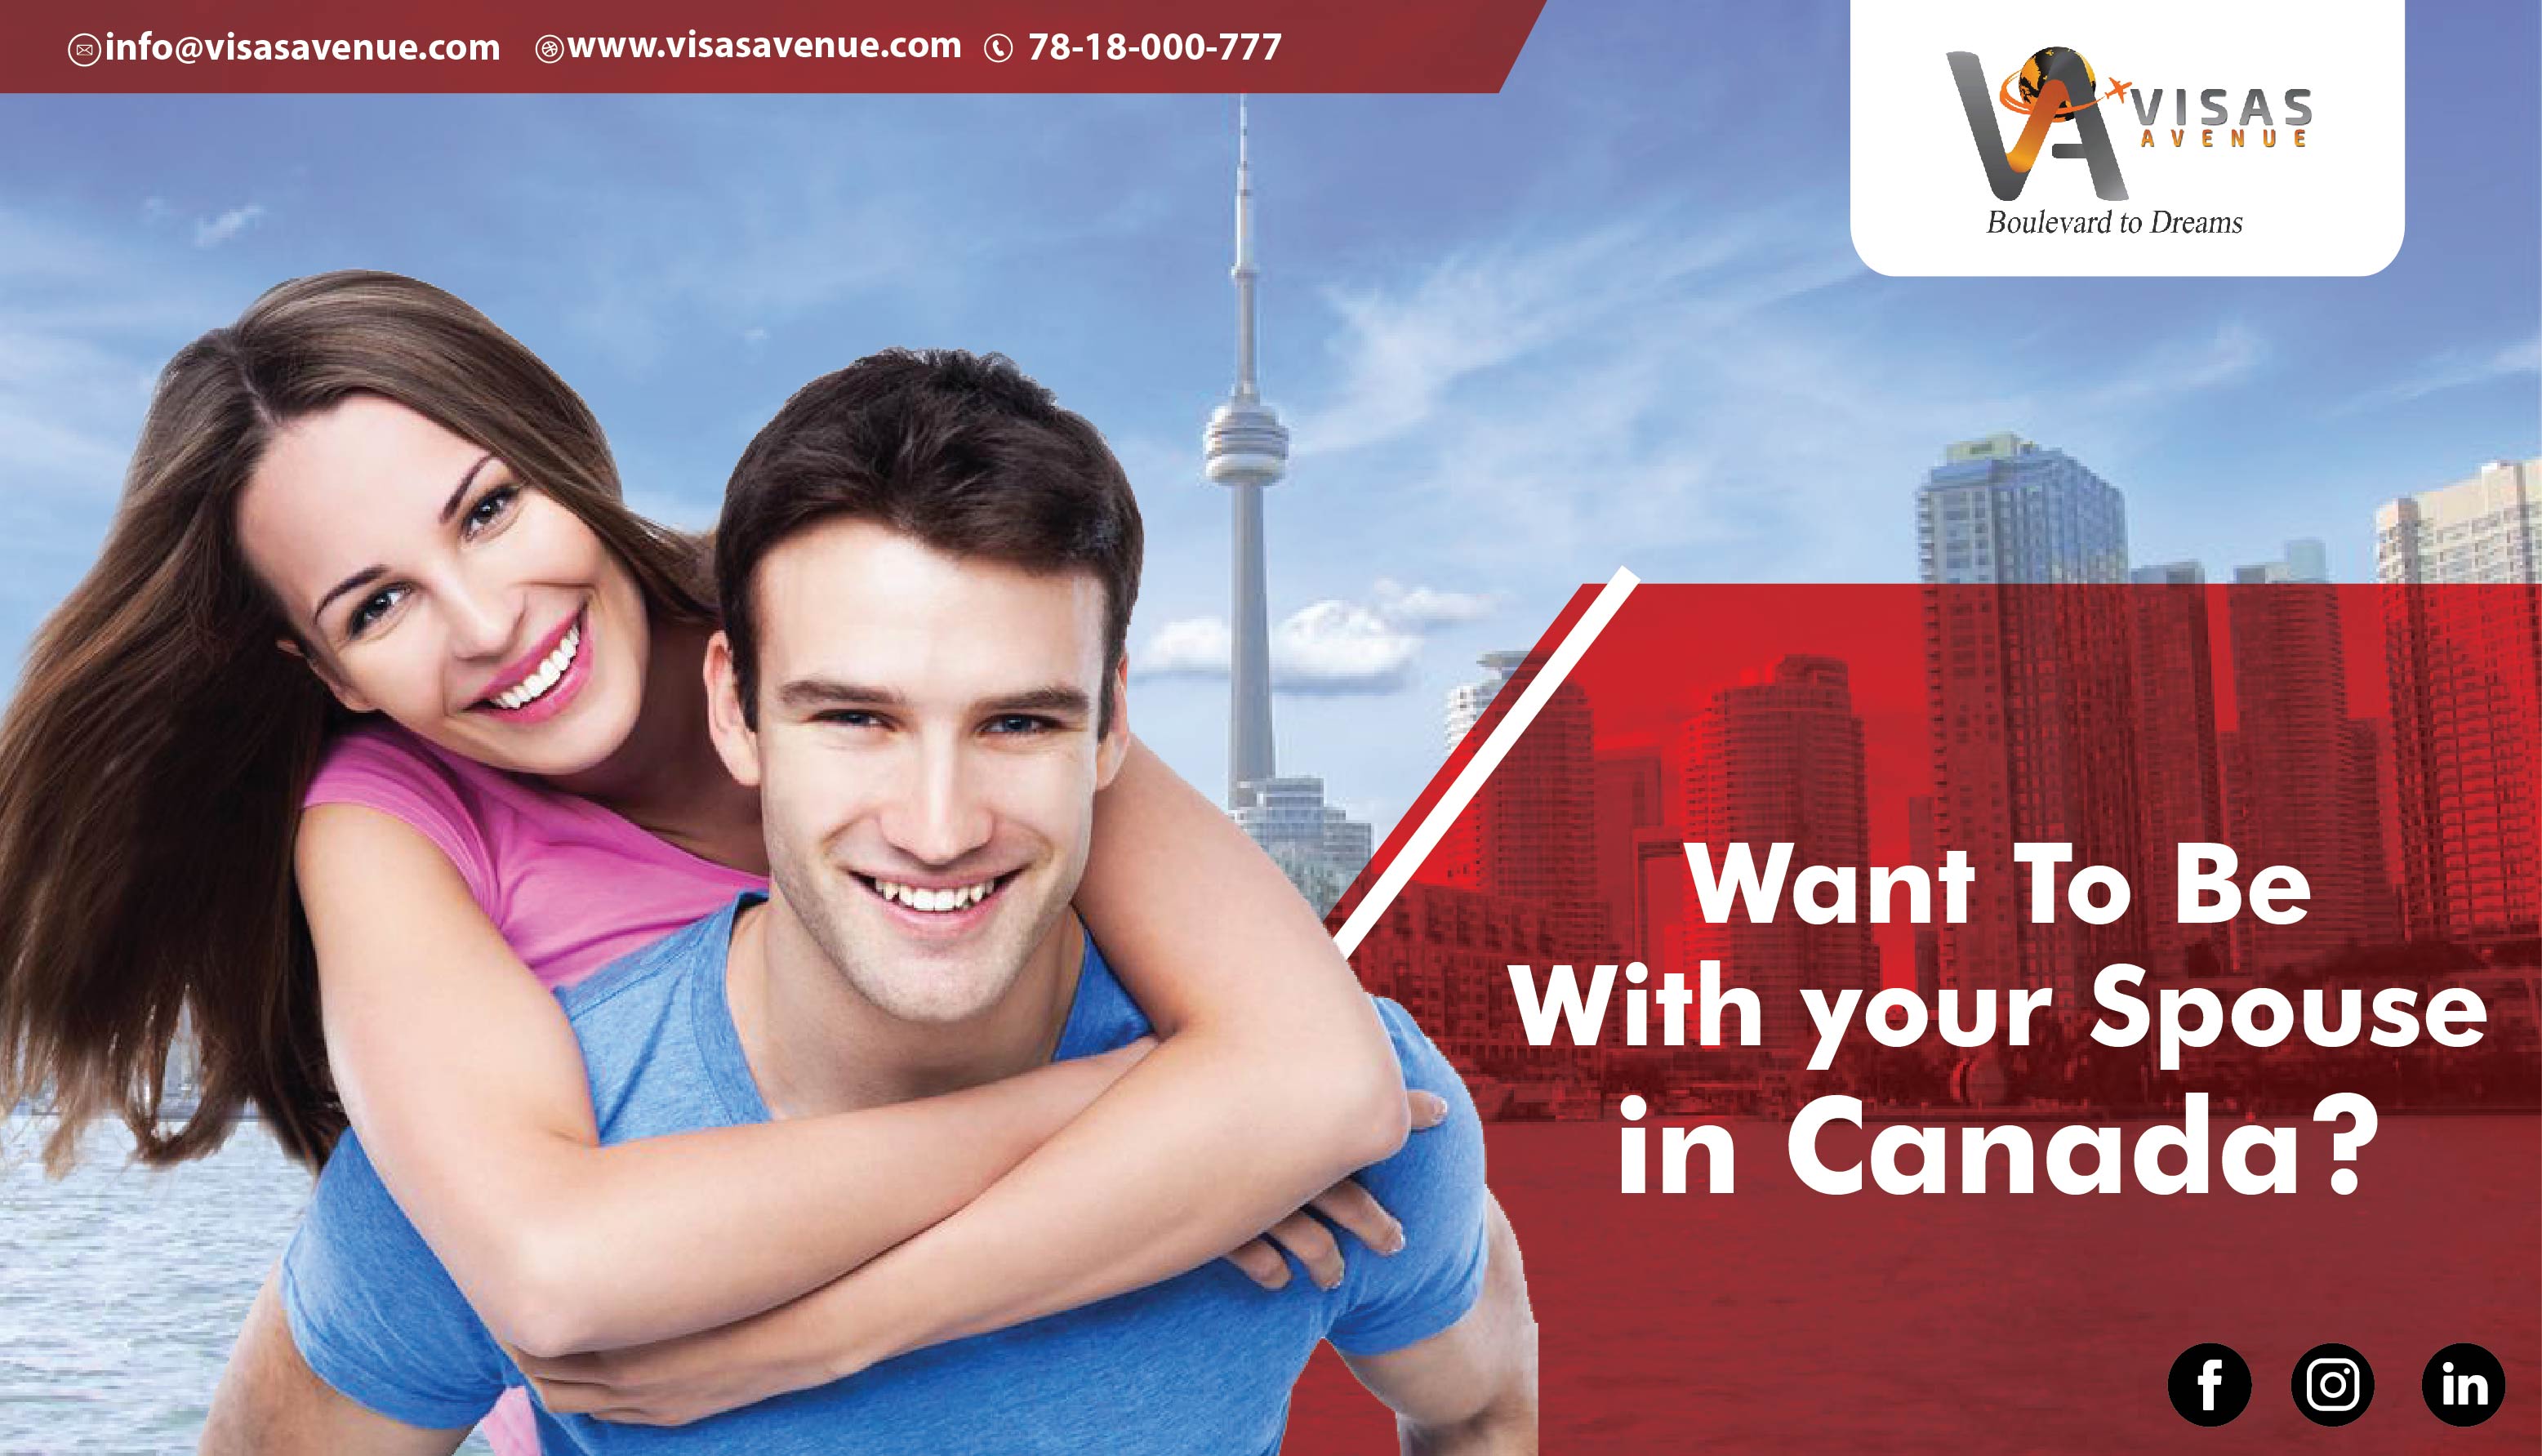 How can I Bring my Spouse to Canada?